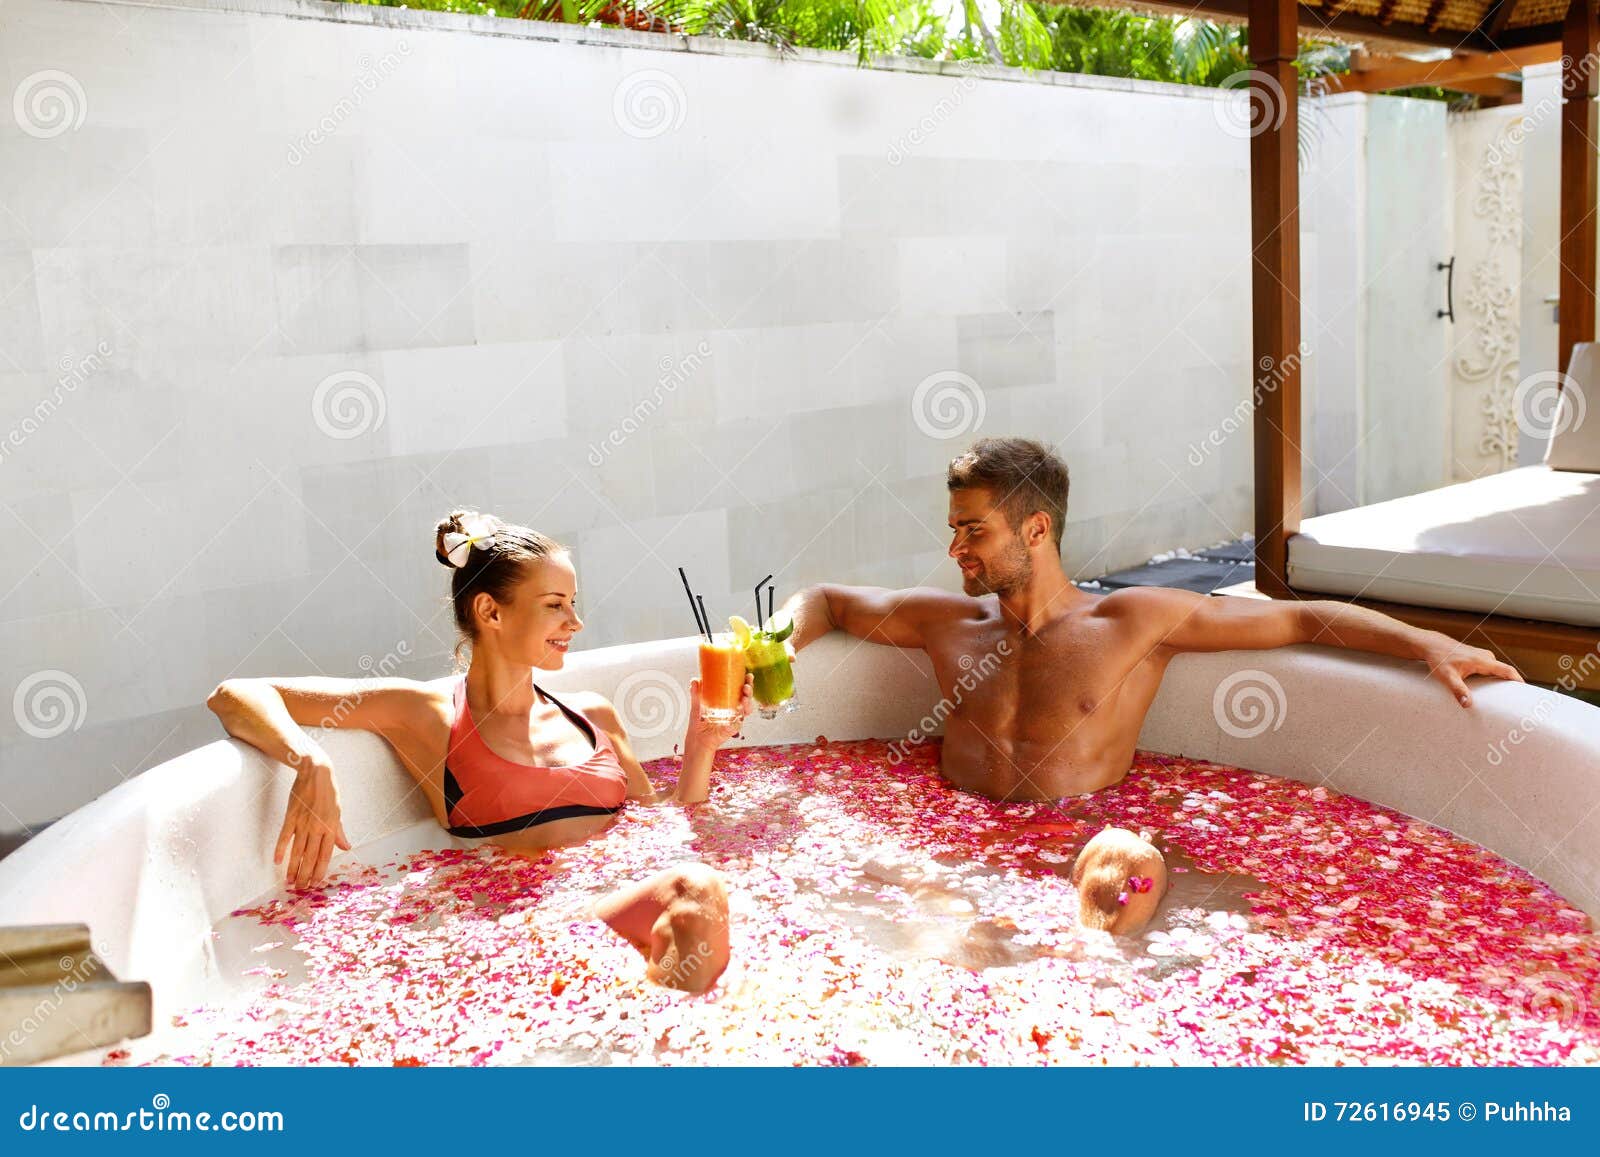 Romantic Vacation. Couple in Love Relaxing at Spa with Cocktails